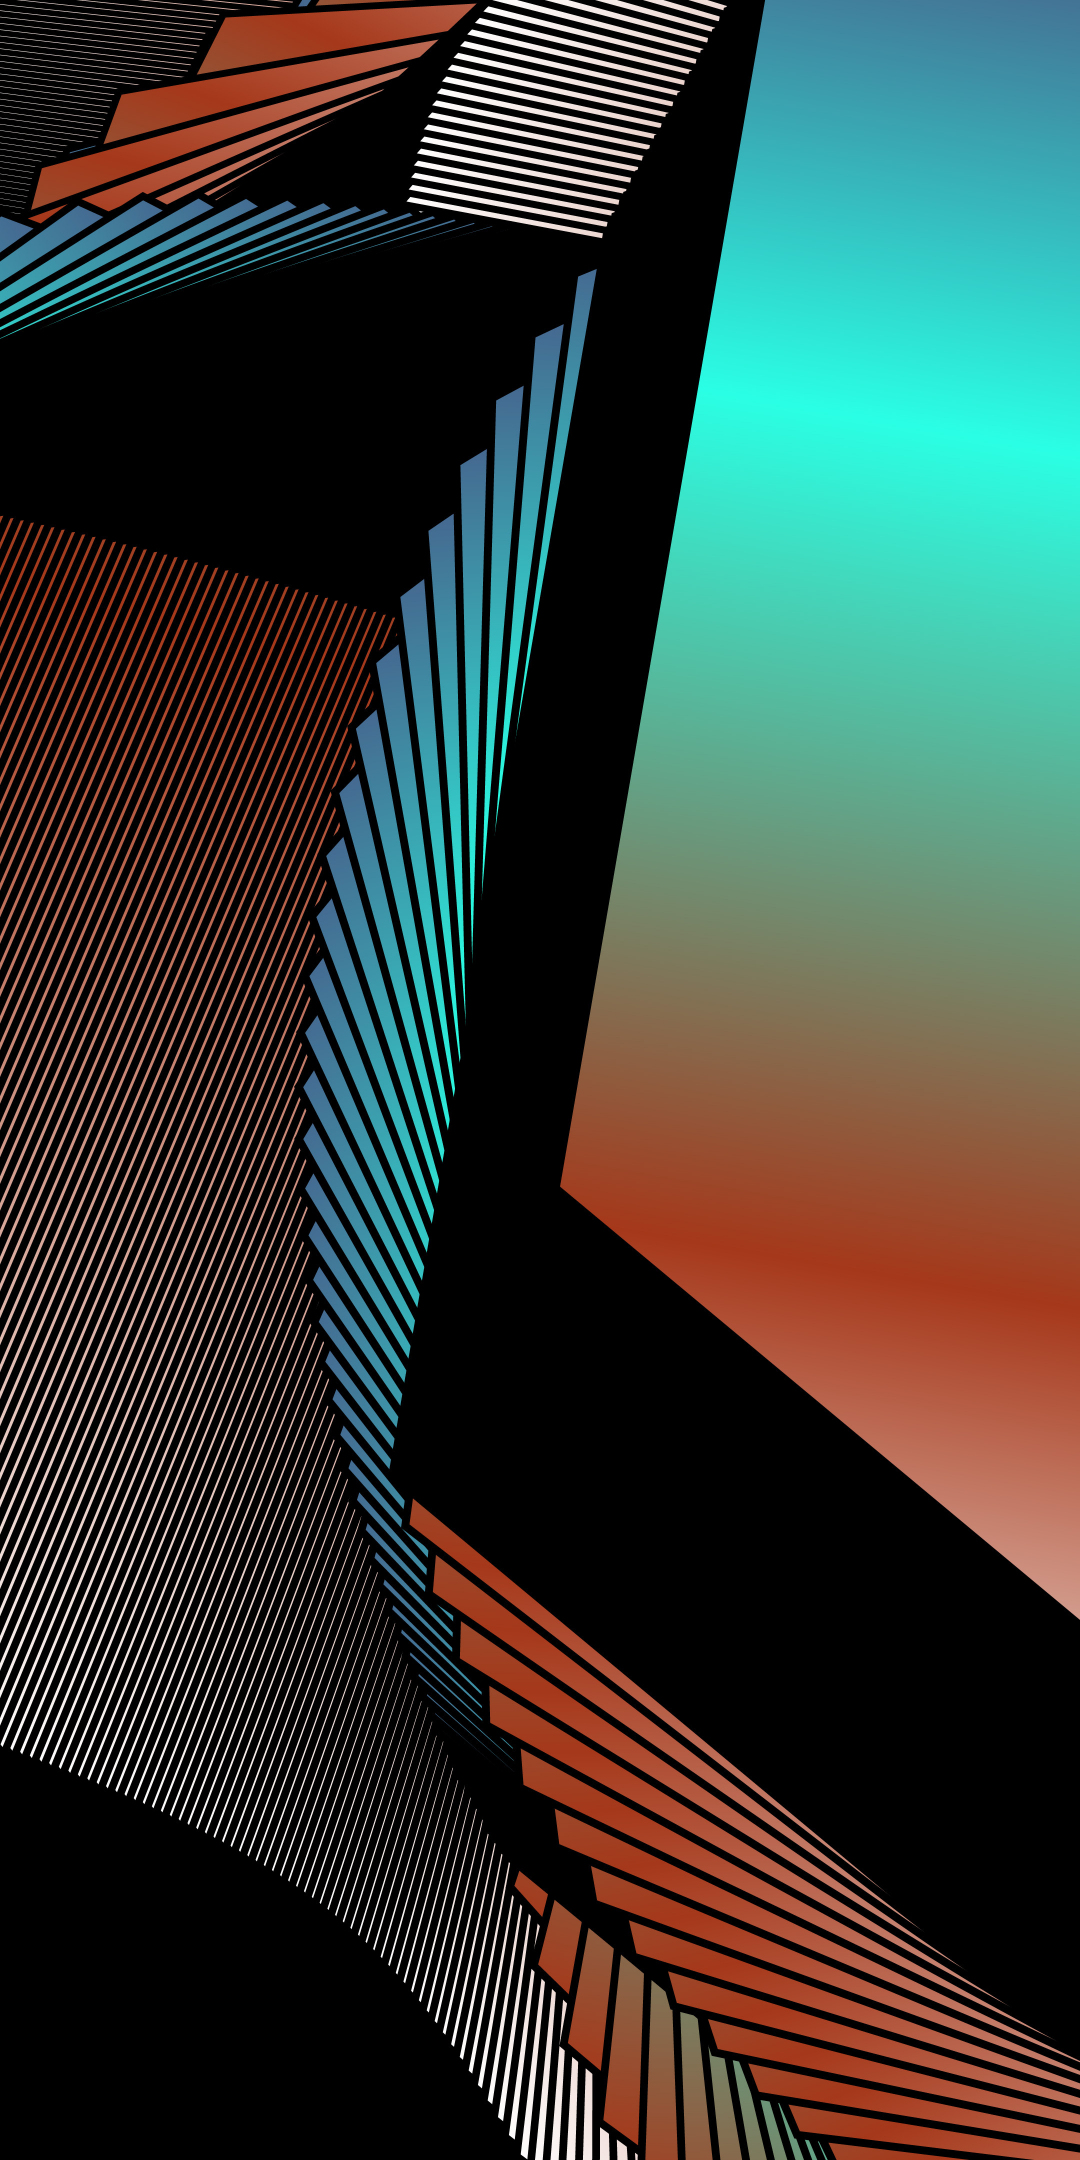 Geometry patterns, hexagonal shapes and more, abstract, 1080x2160 wallpaper